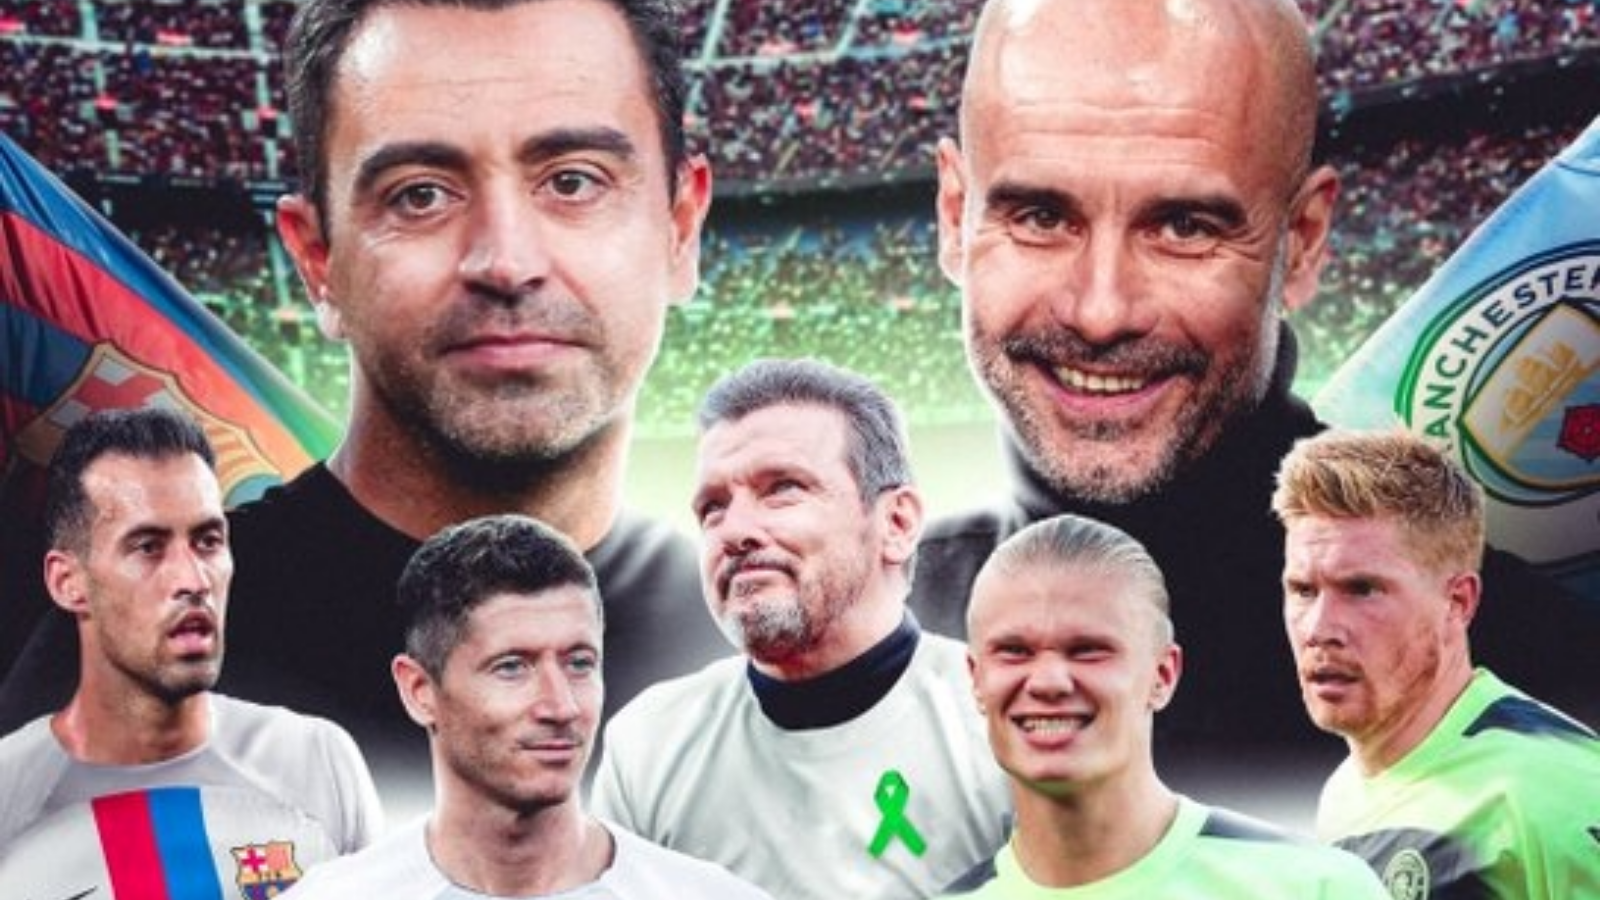 Barcelona vs Man City Live stream, TV channel, kick-off time and how to watch the charity match Goal